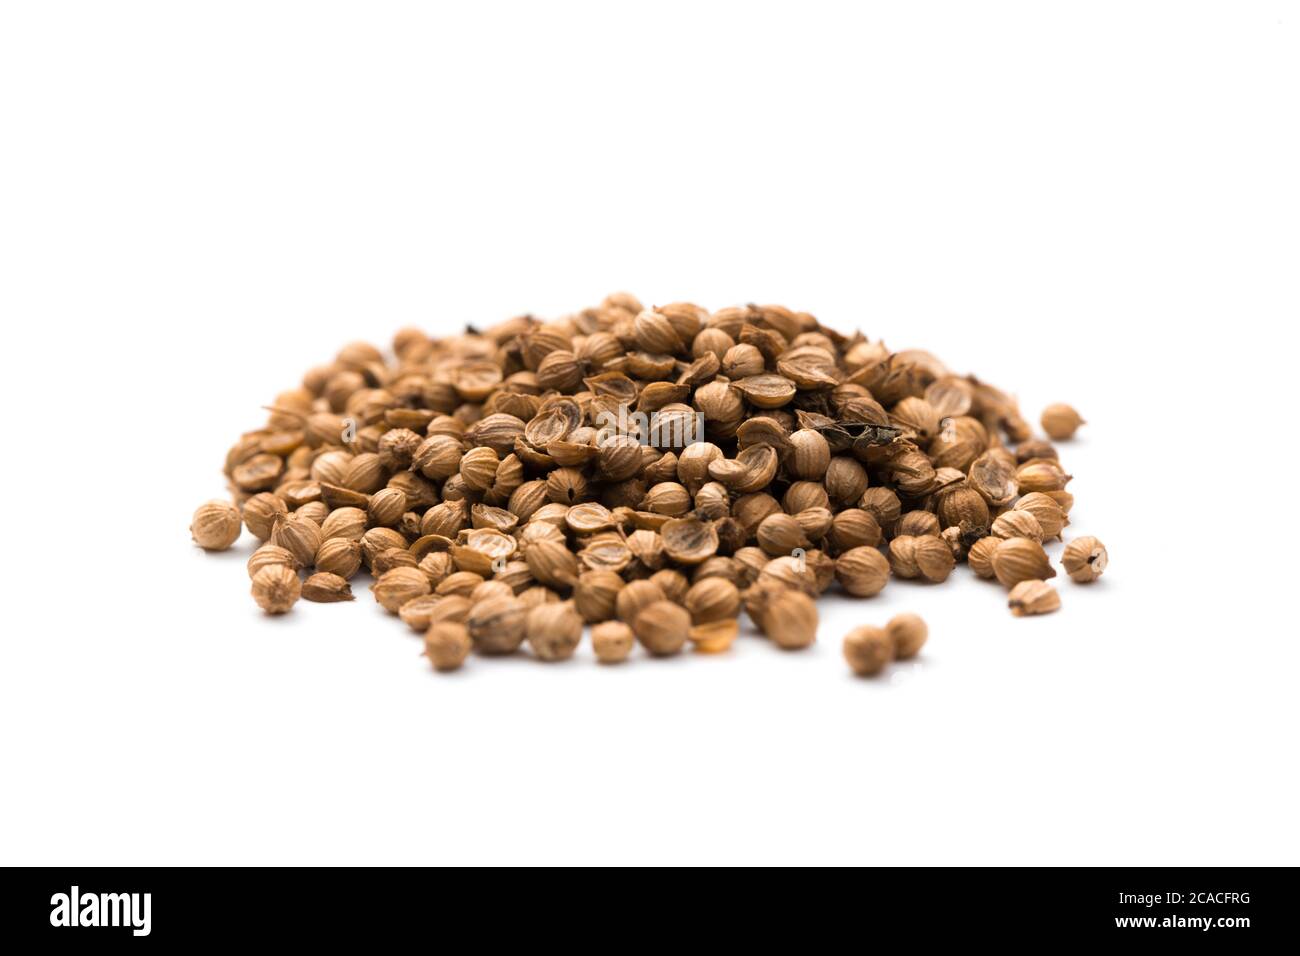 Heap of raw, unprocessed organic coriander or cilantro seeds on white background Stock Photo